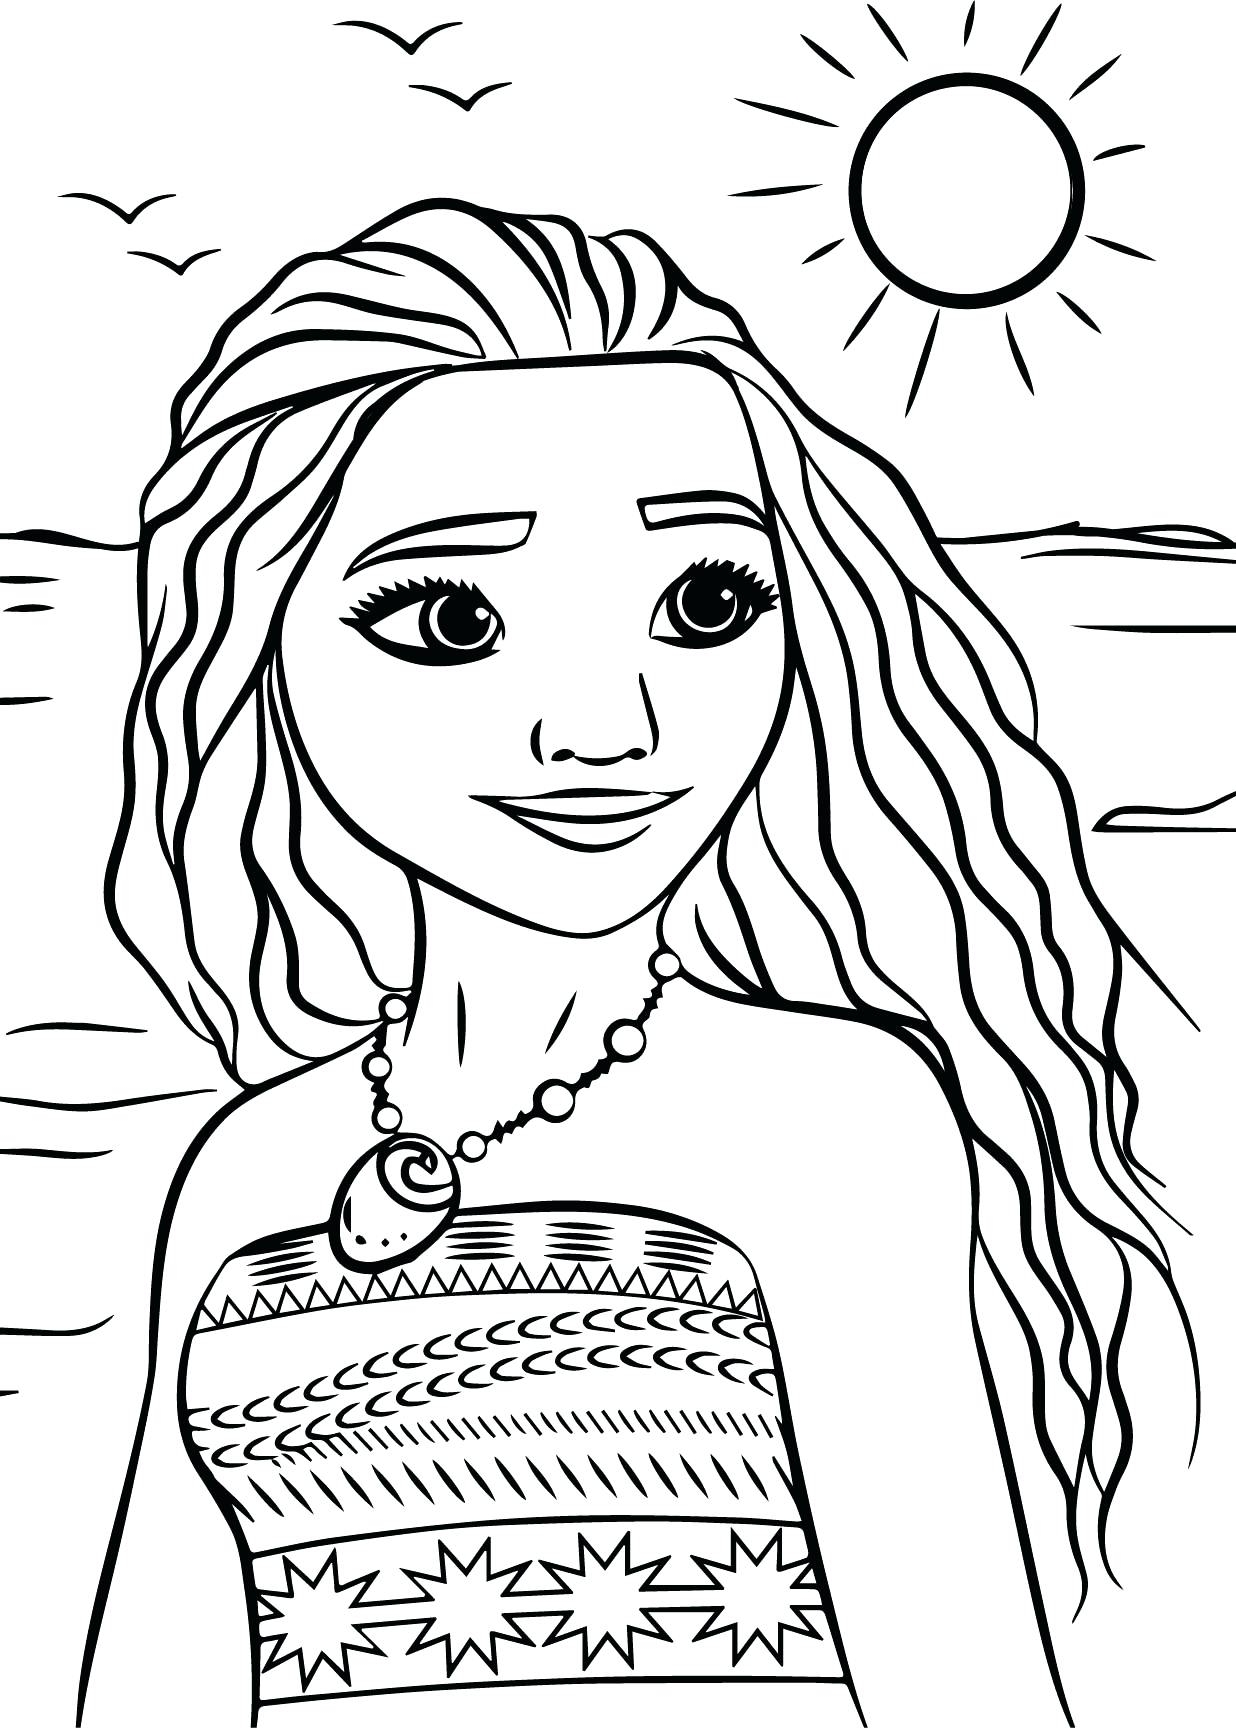 Disney Coloring Pages Moana at GetColorings.com | Free ...